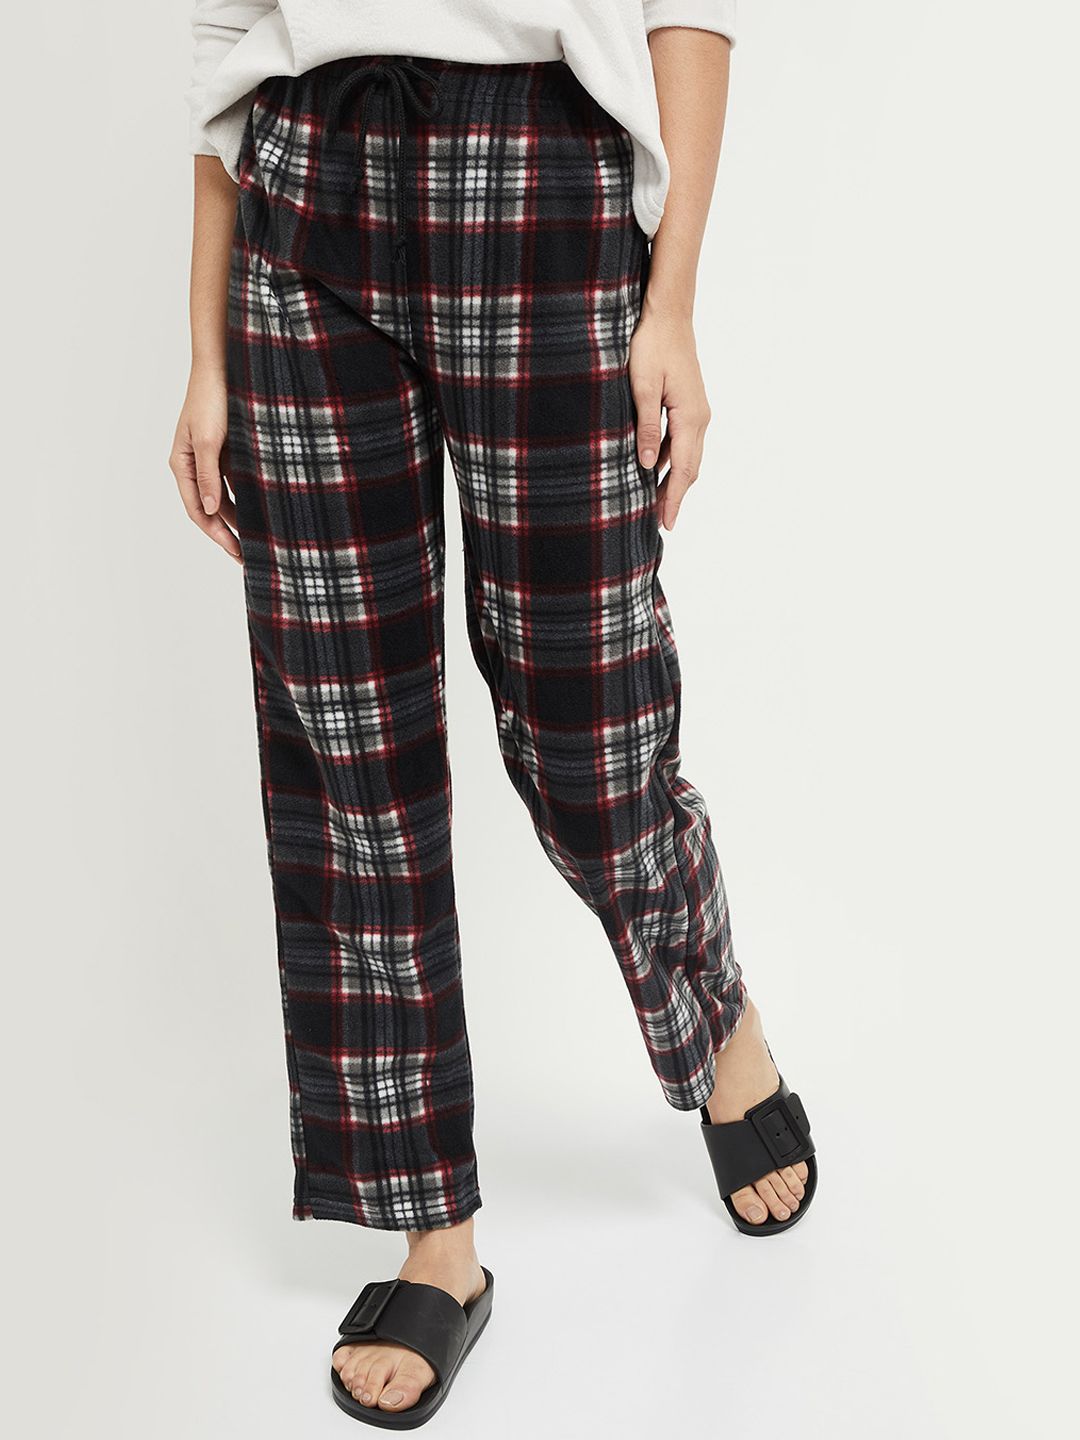 max Women Black & White Checked Lounge Pants Price in India